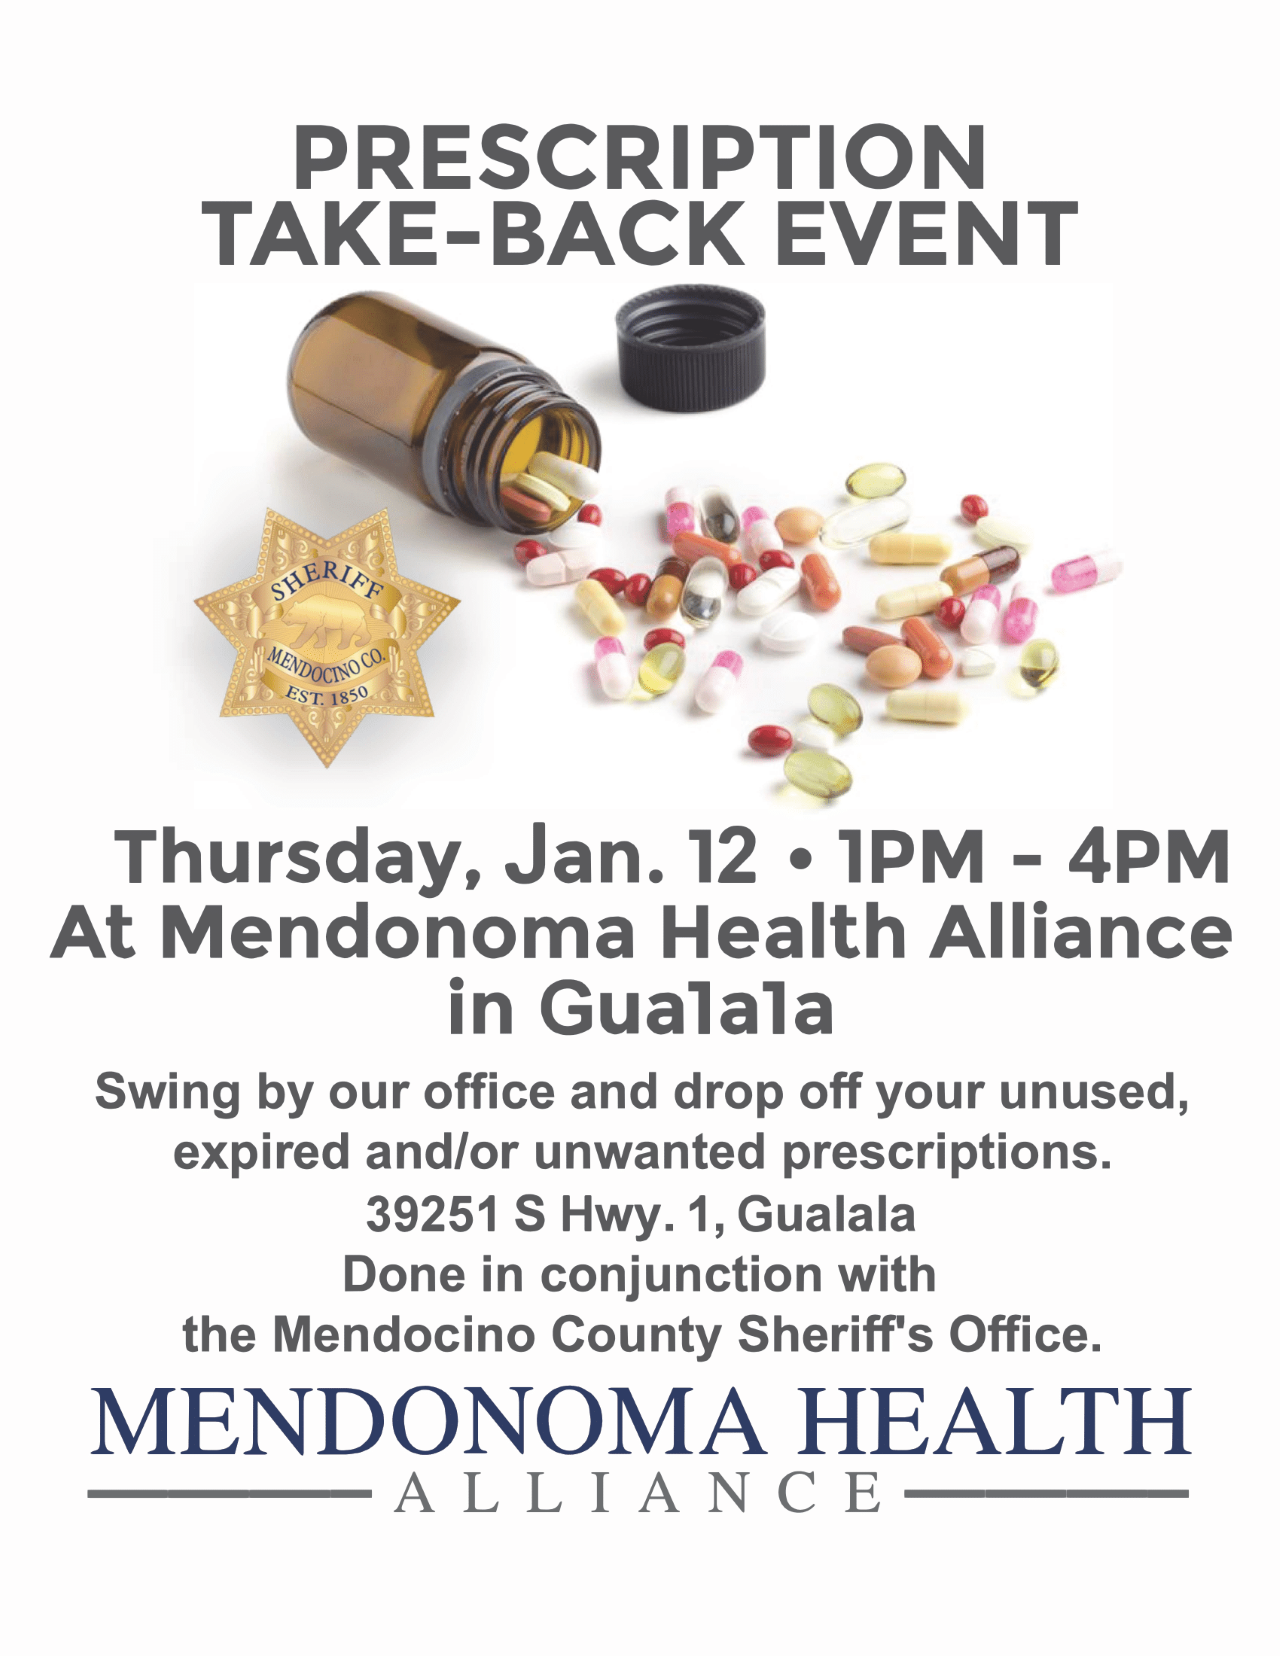 RX Take-back event flyer with sheriff's badge & a bottle of spilled pills. In Gualala on January 12 from 1 - 4 pm at the MHA office